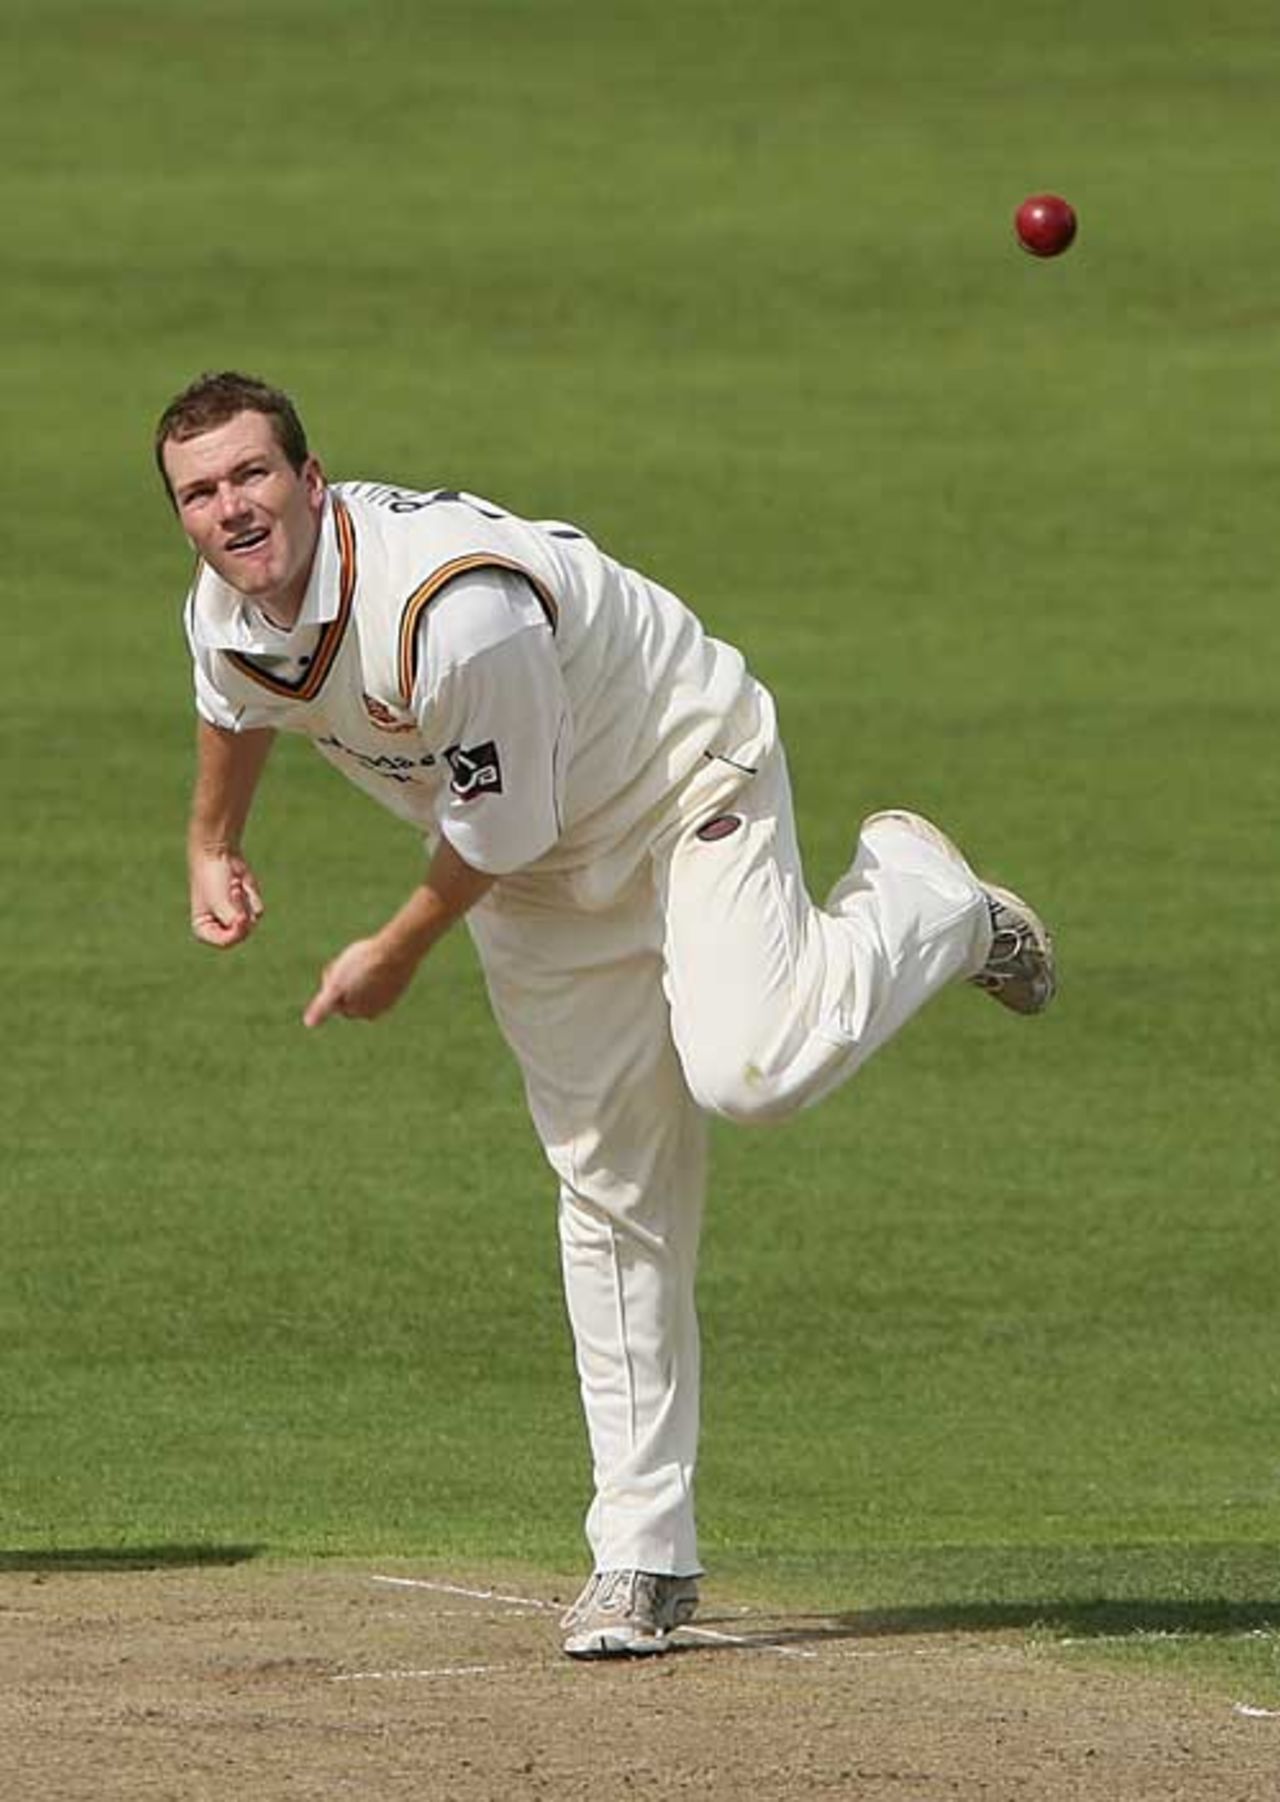 Tim Phillips in action against Worcestershire, Worcestershire v Essex, County Championship, August 30, 2006